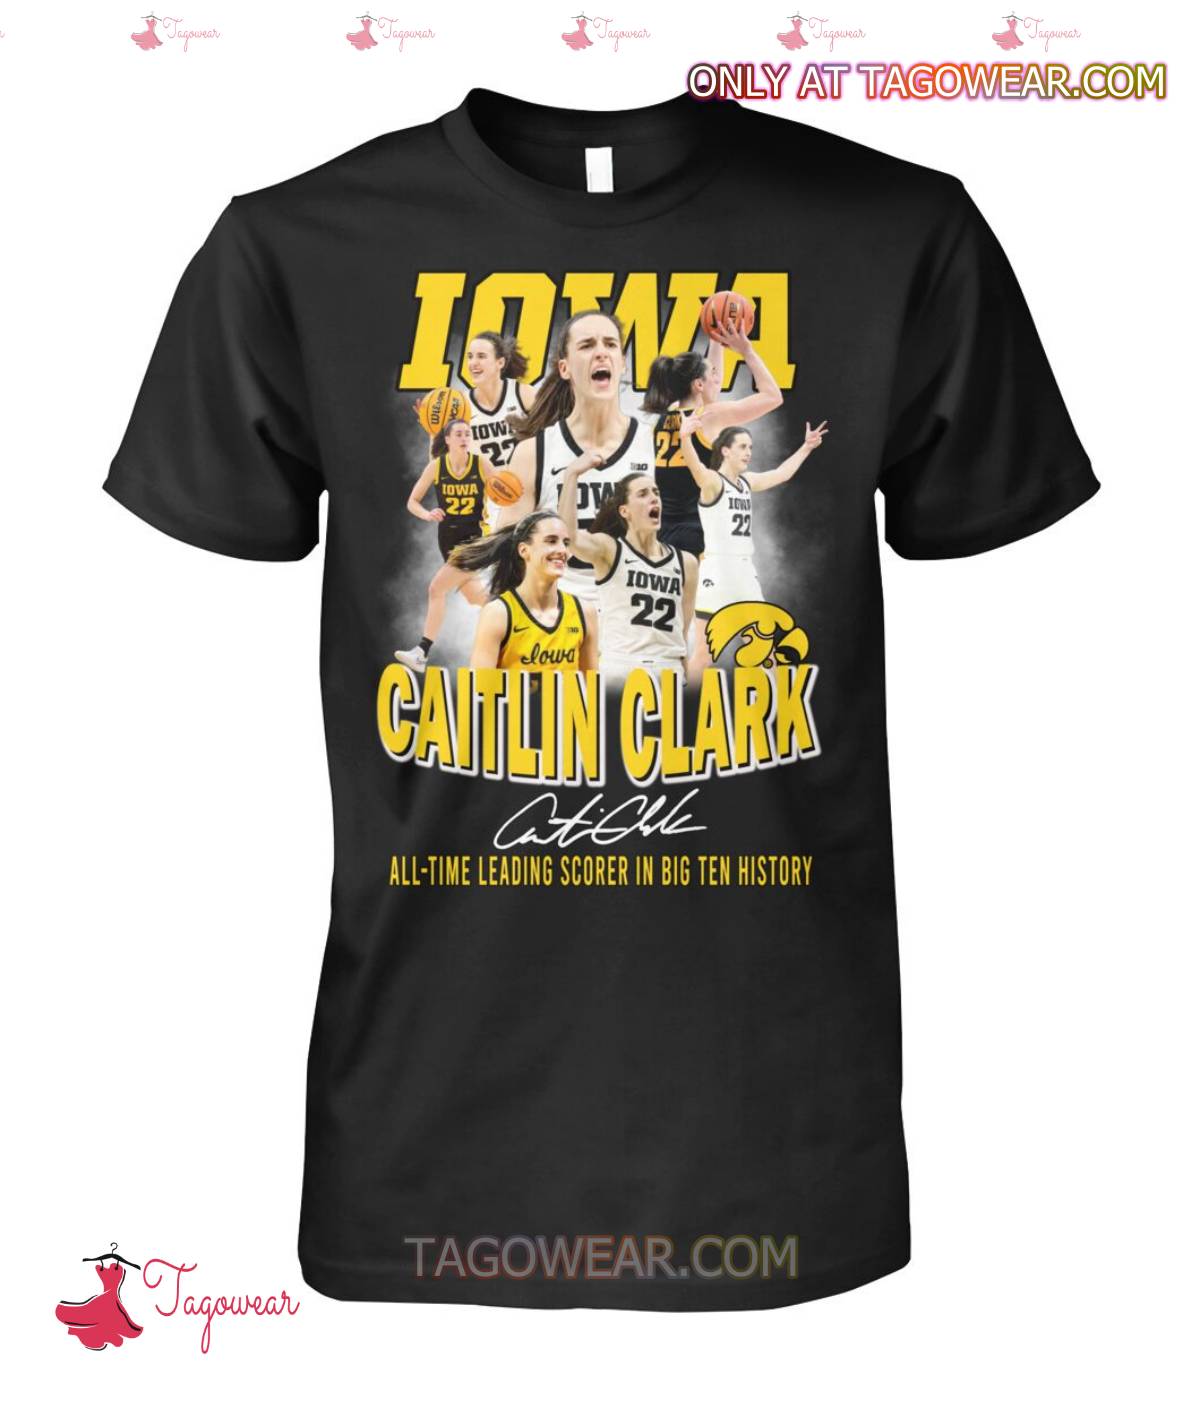 Iowa Caitlin Clark Signature All-time Leading Scorer In Big Ten History Shirt a